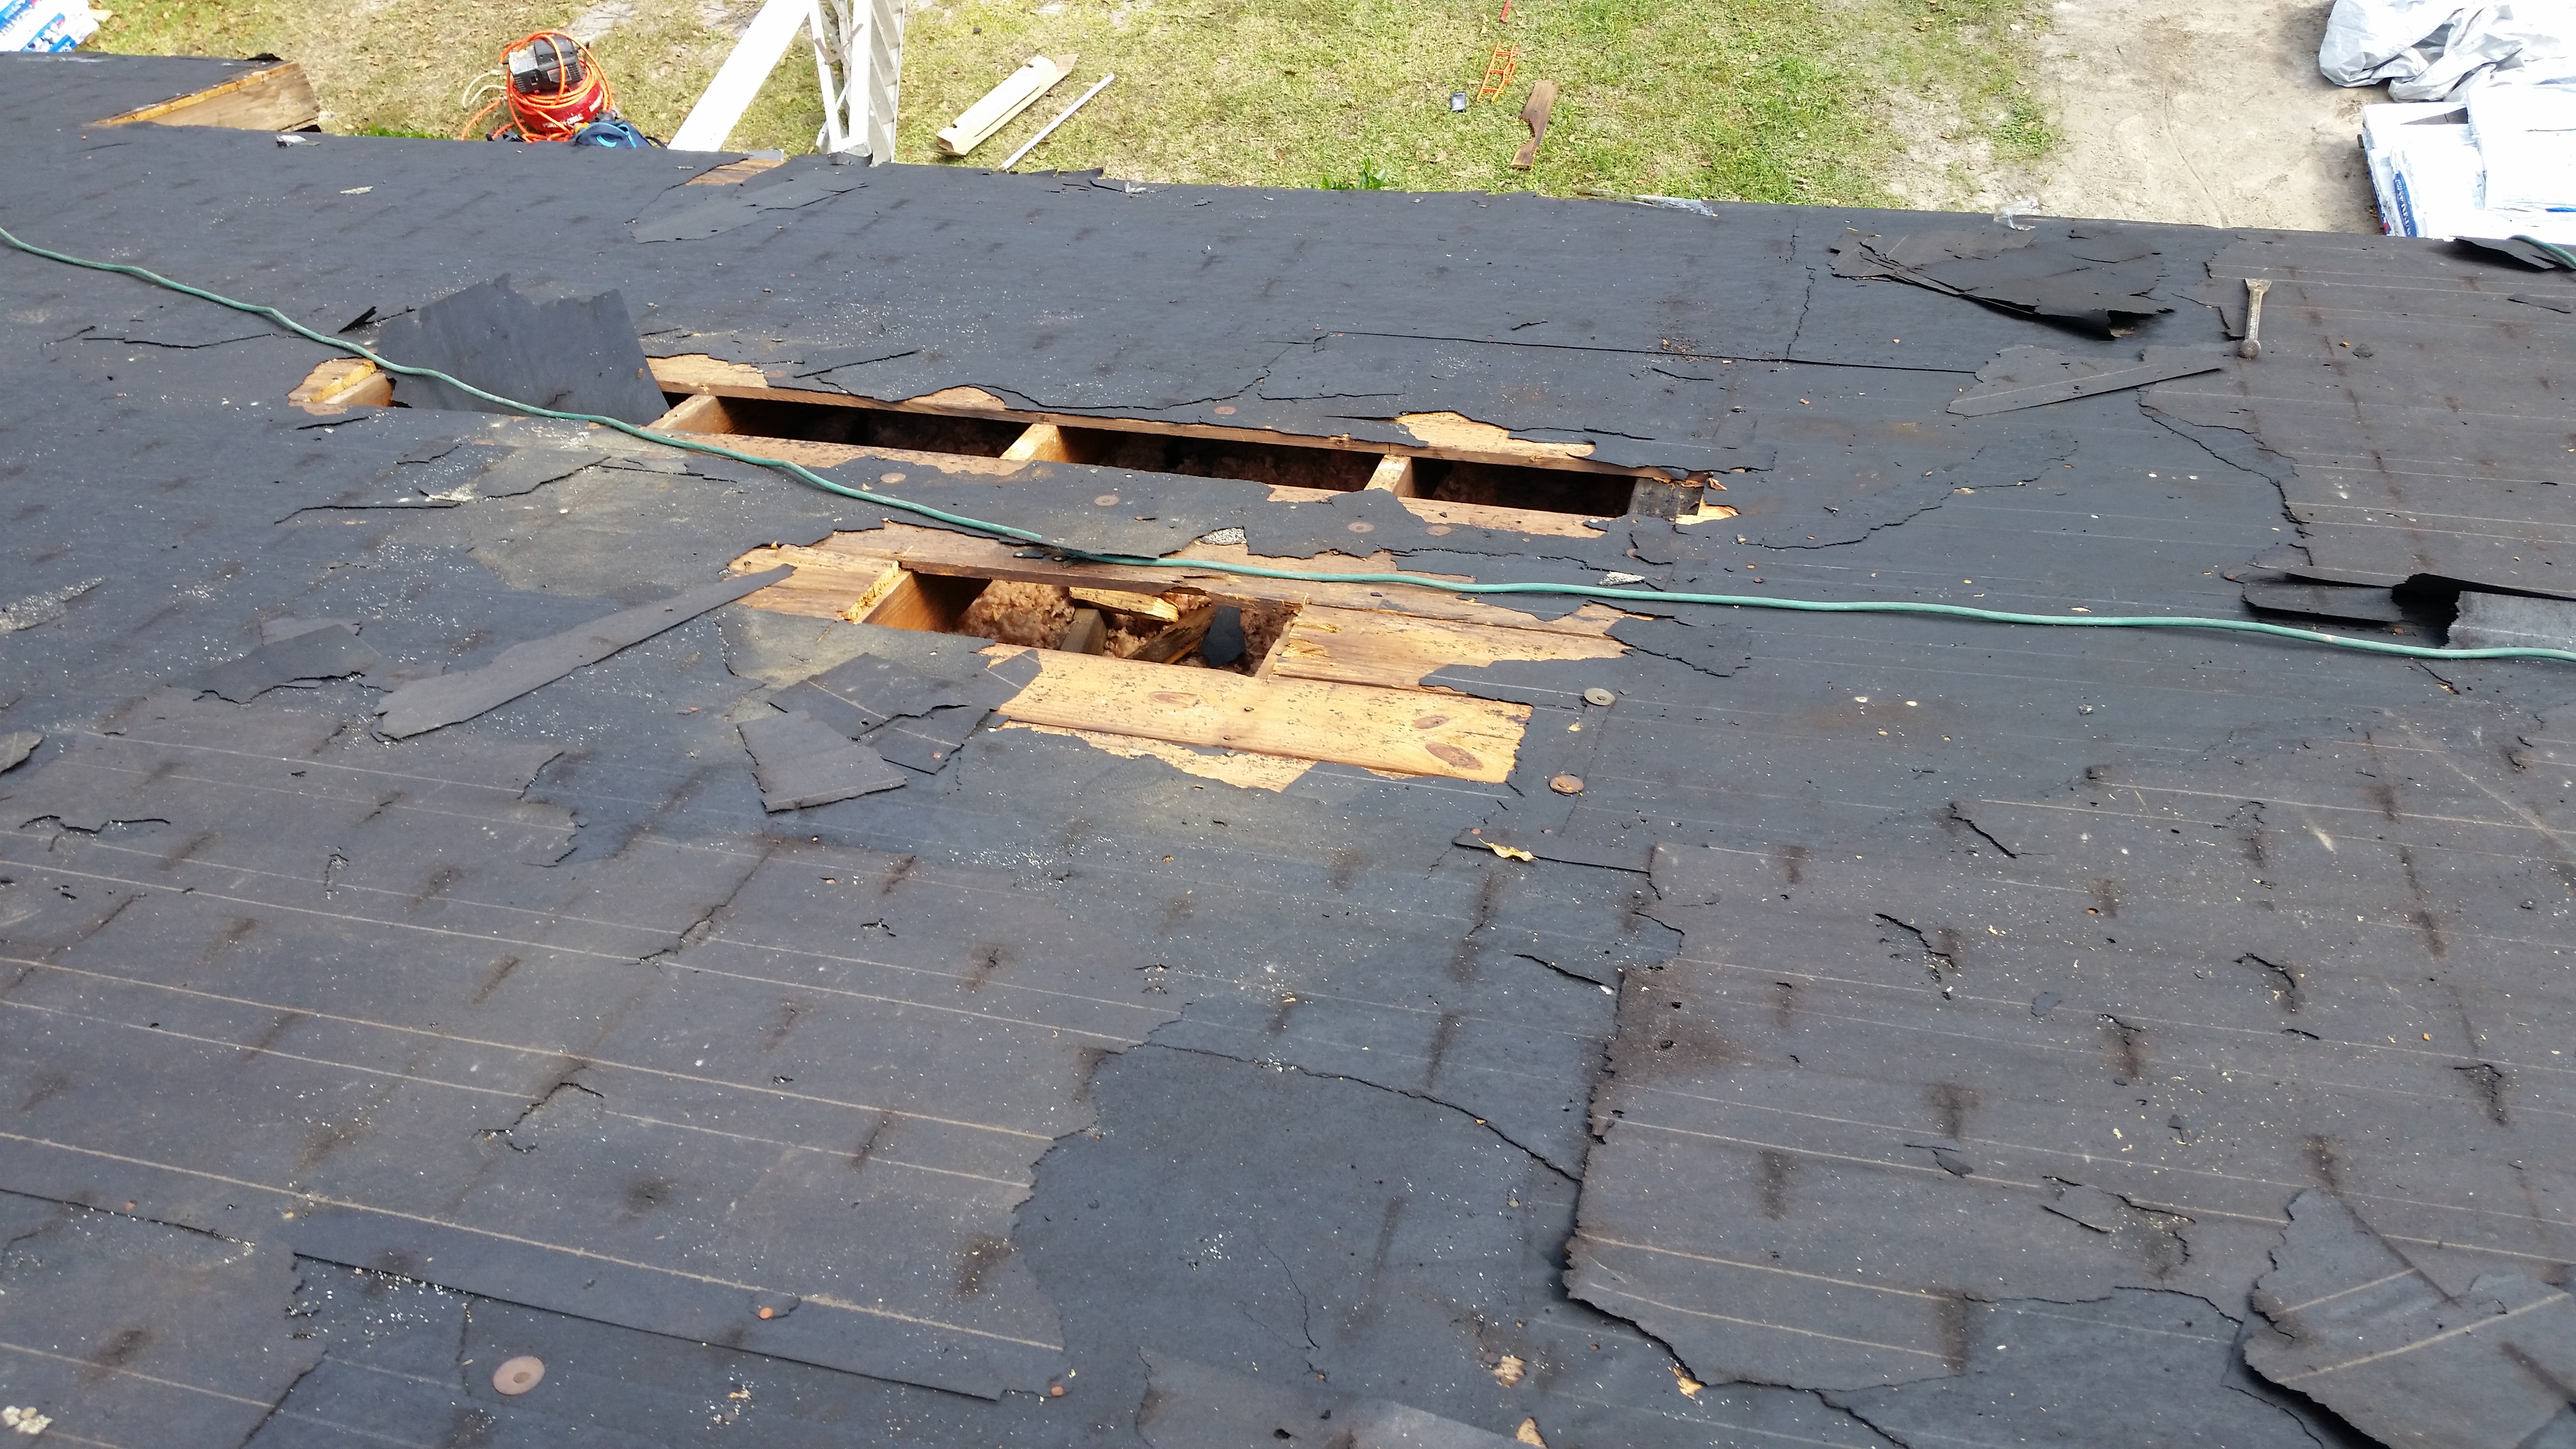 Ranger Roofing & Remodeling Is Currently Amongst the Best Roofing Contractors in Brandon, FL